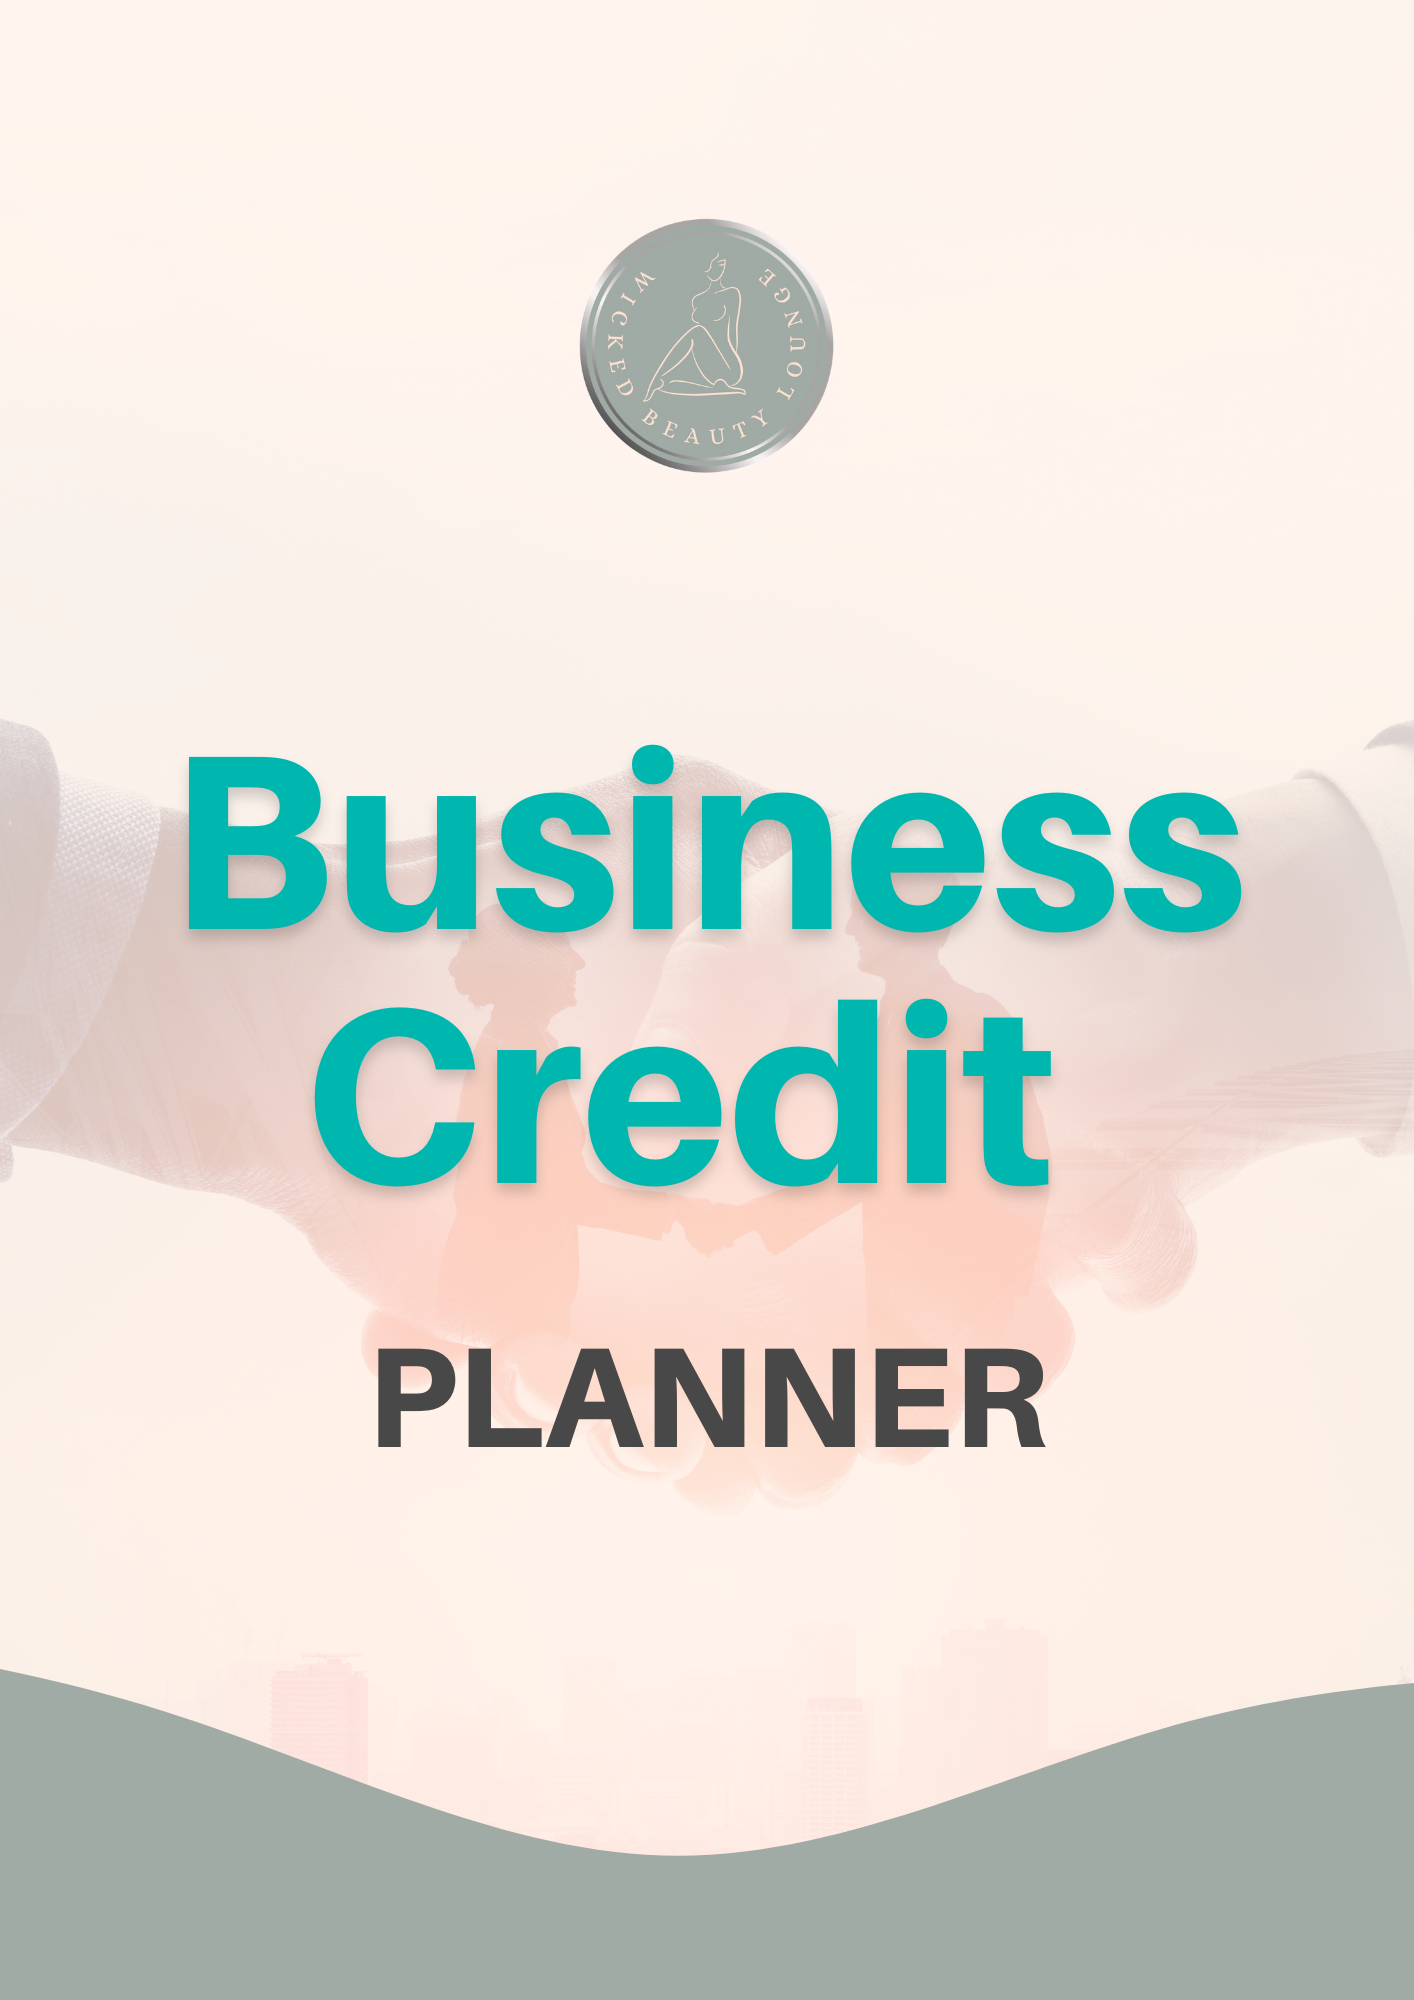 Business Credit Course